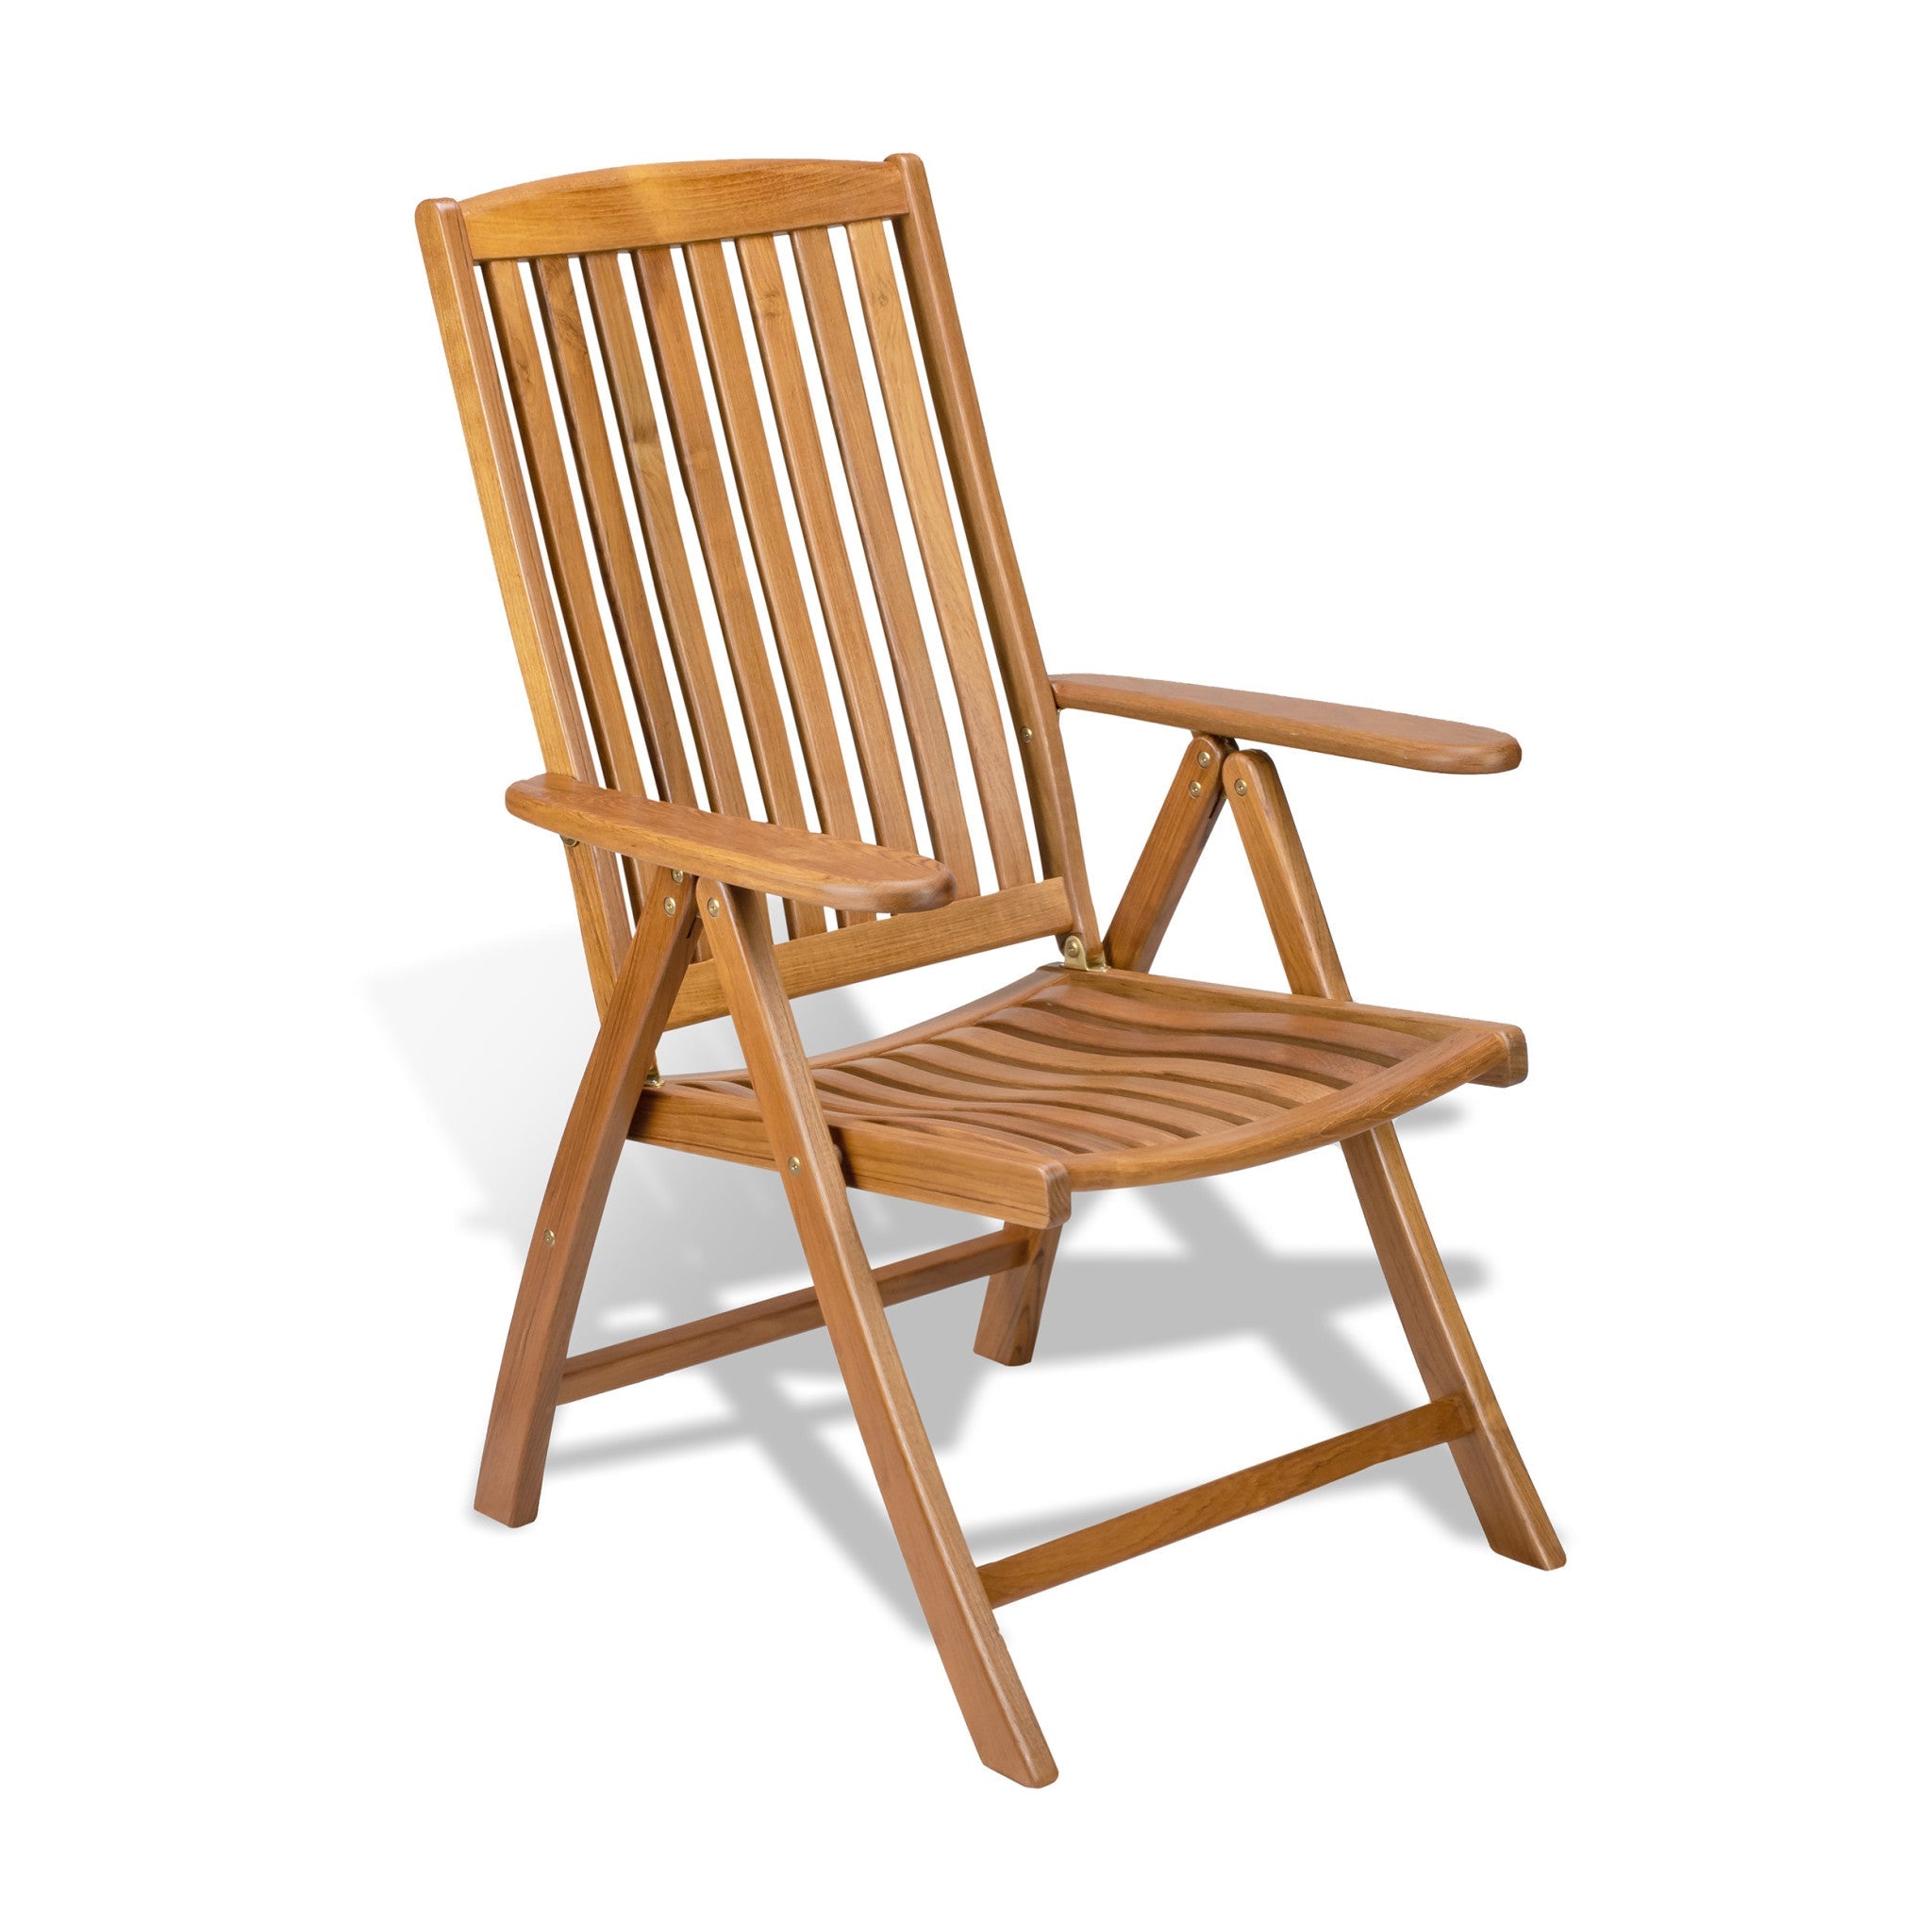 Brown-Solid-Wood-Reclining-Deck-Chair-Outdoor-Chairs